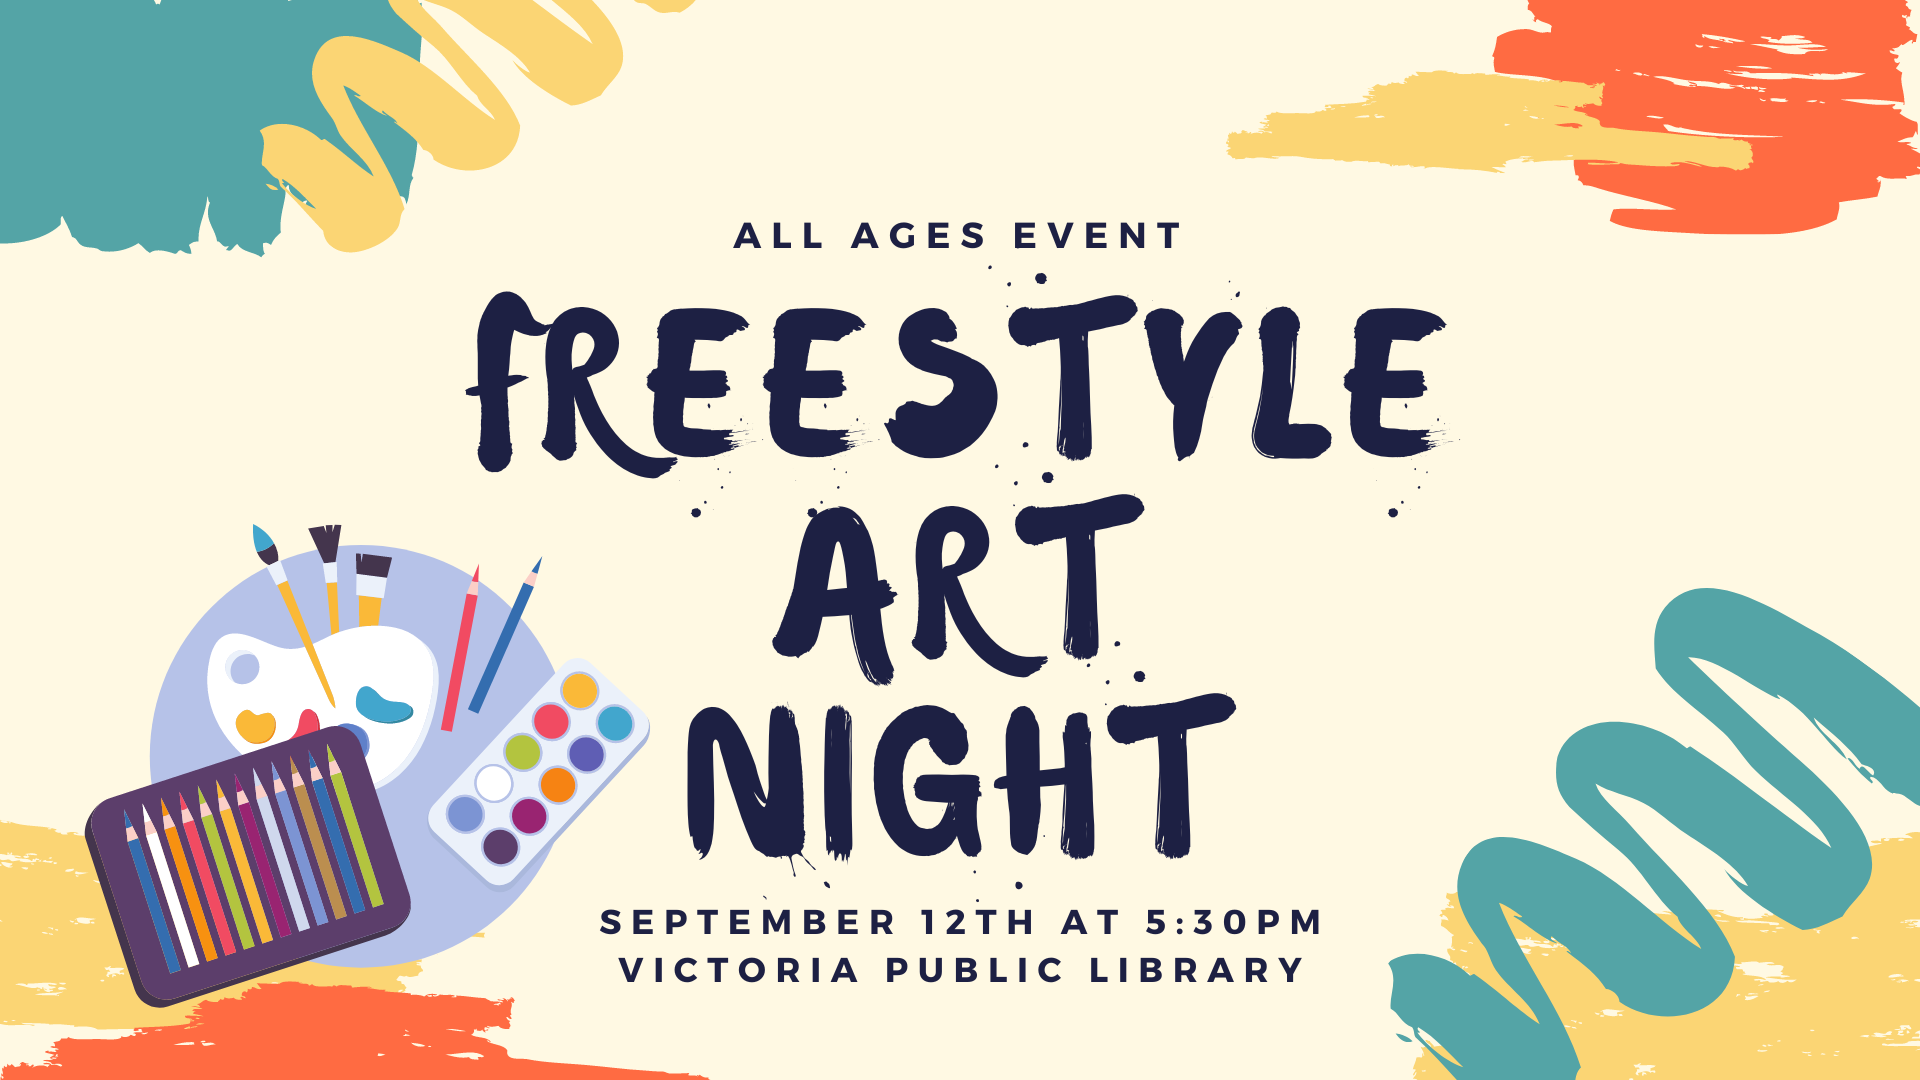 Freestyle art night, September 12th at 5:30pm